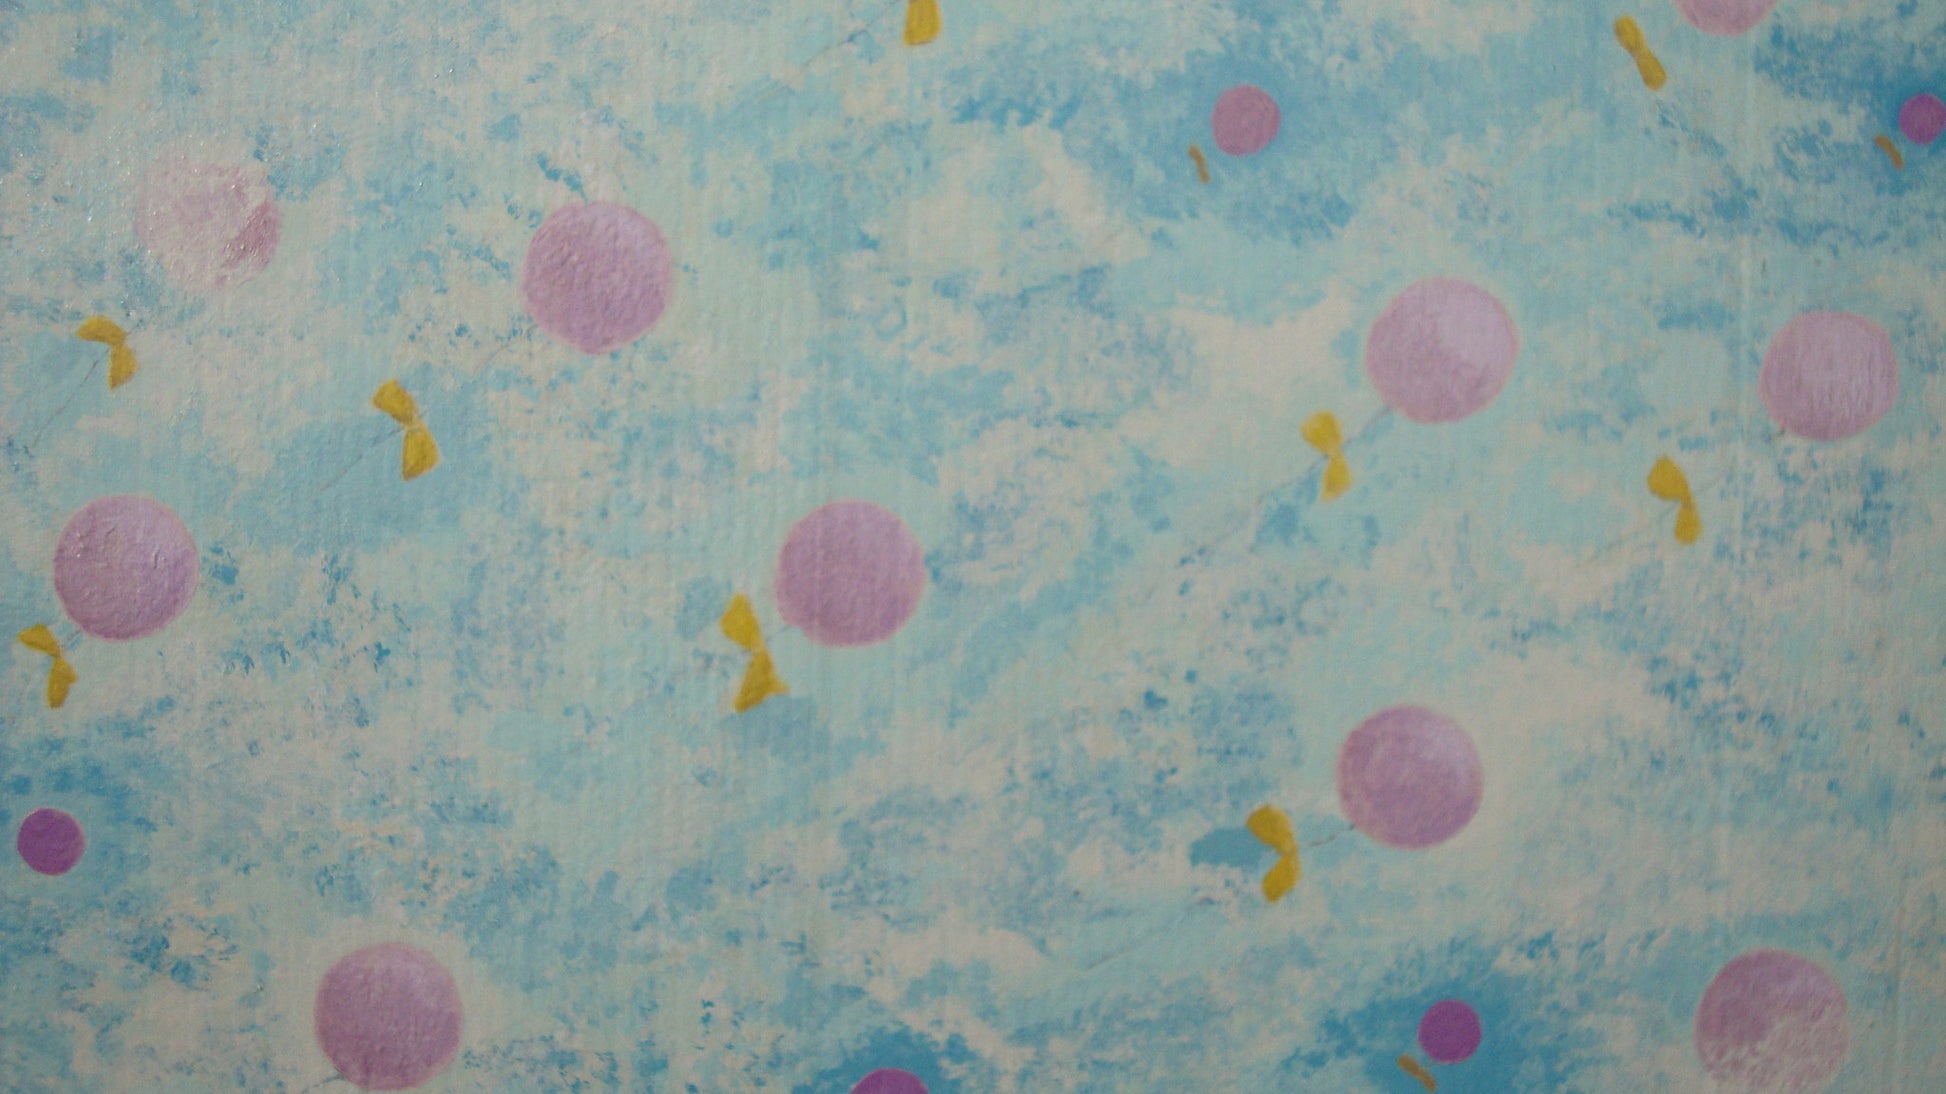 Pink Balloons - Original Painting Abby Essie